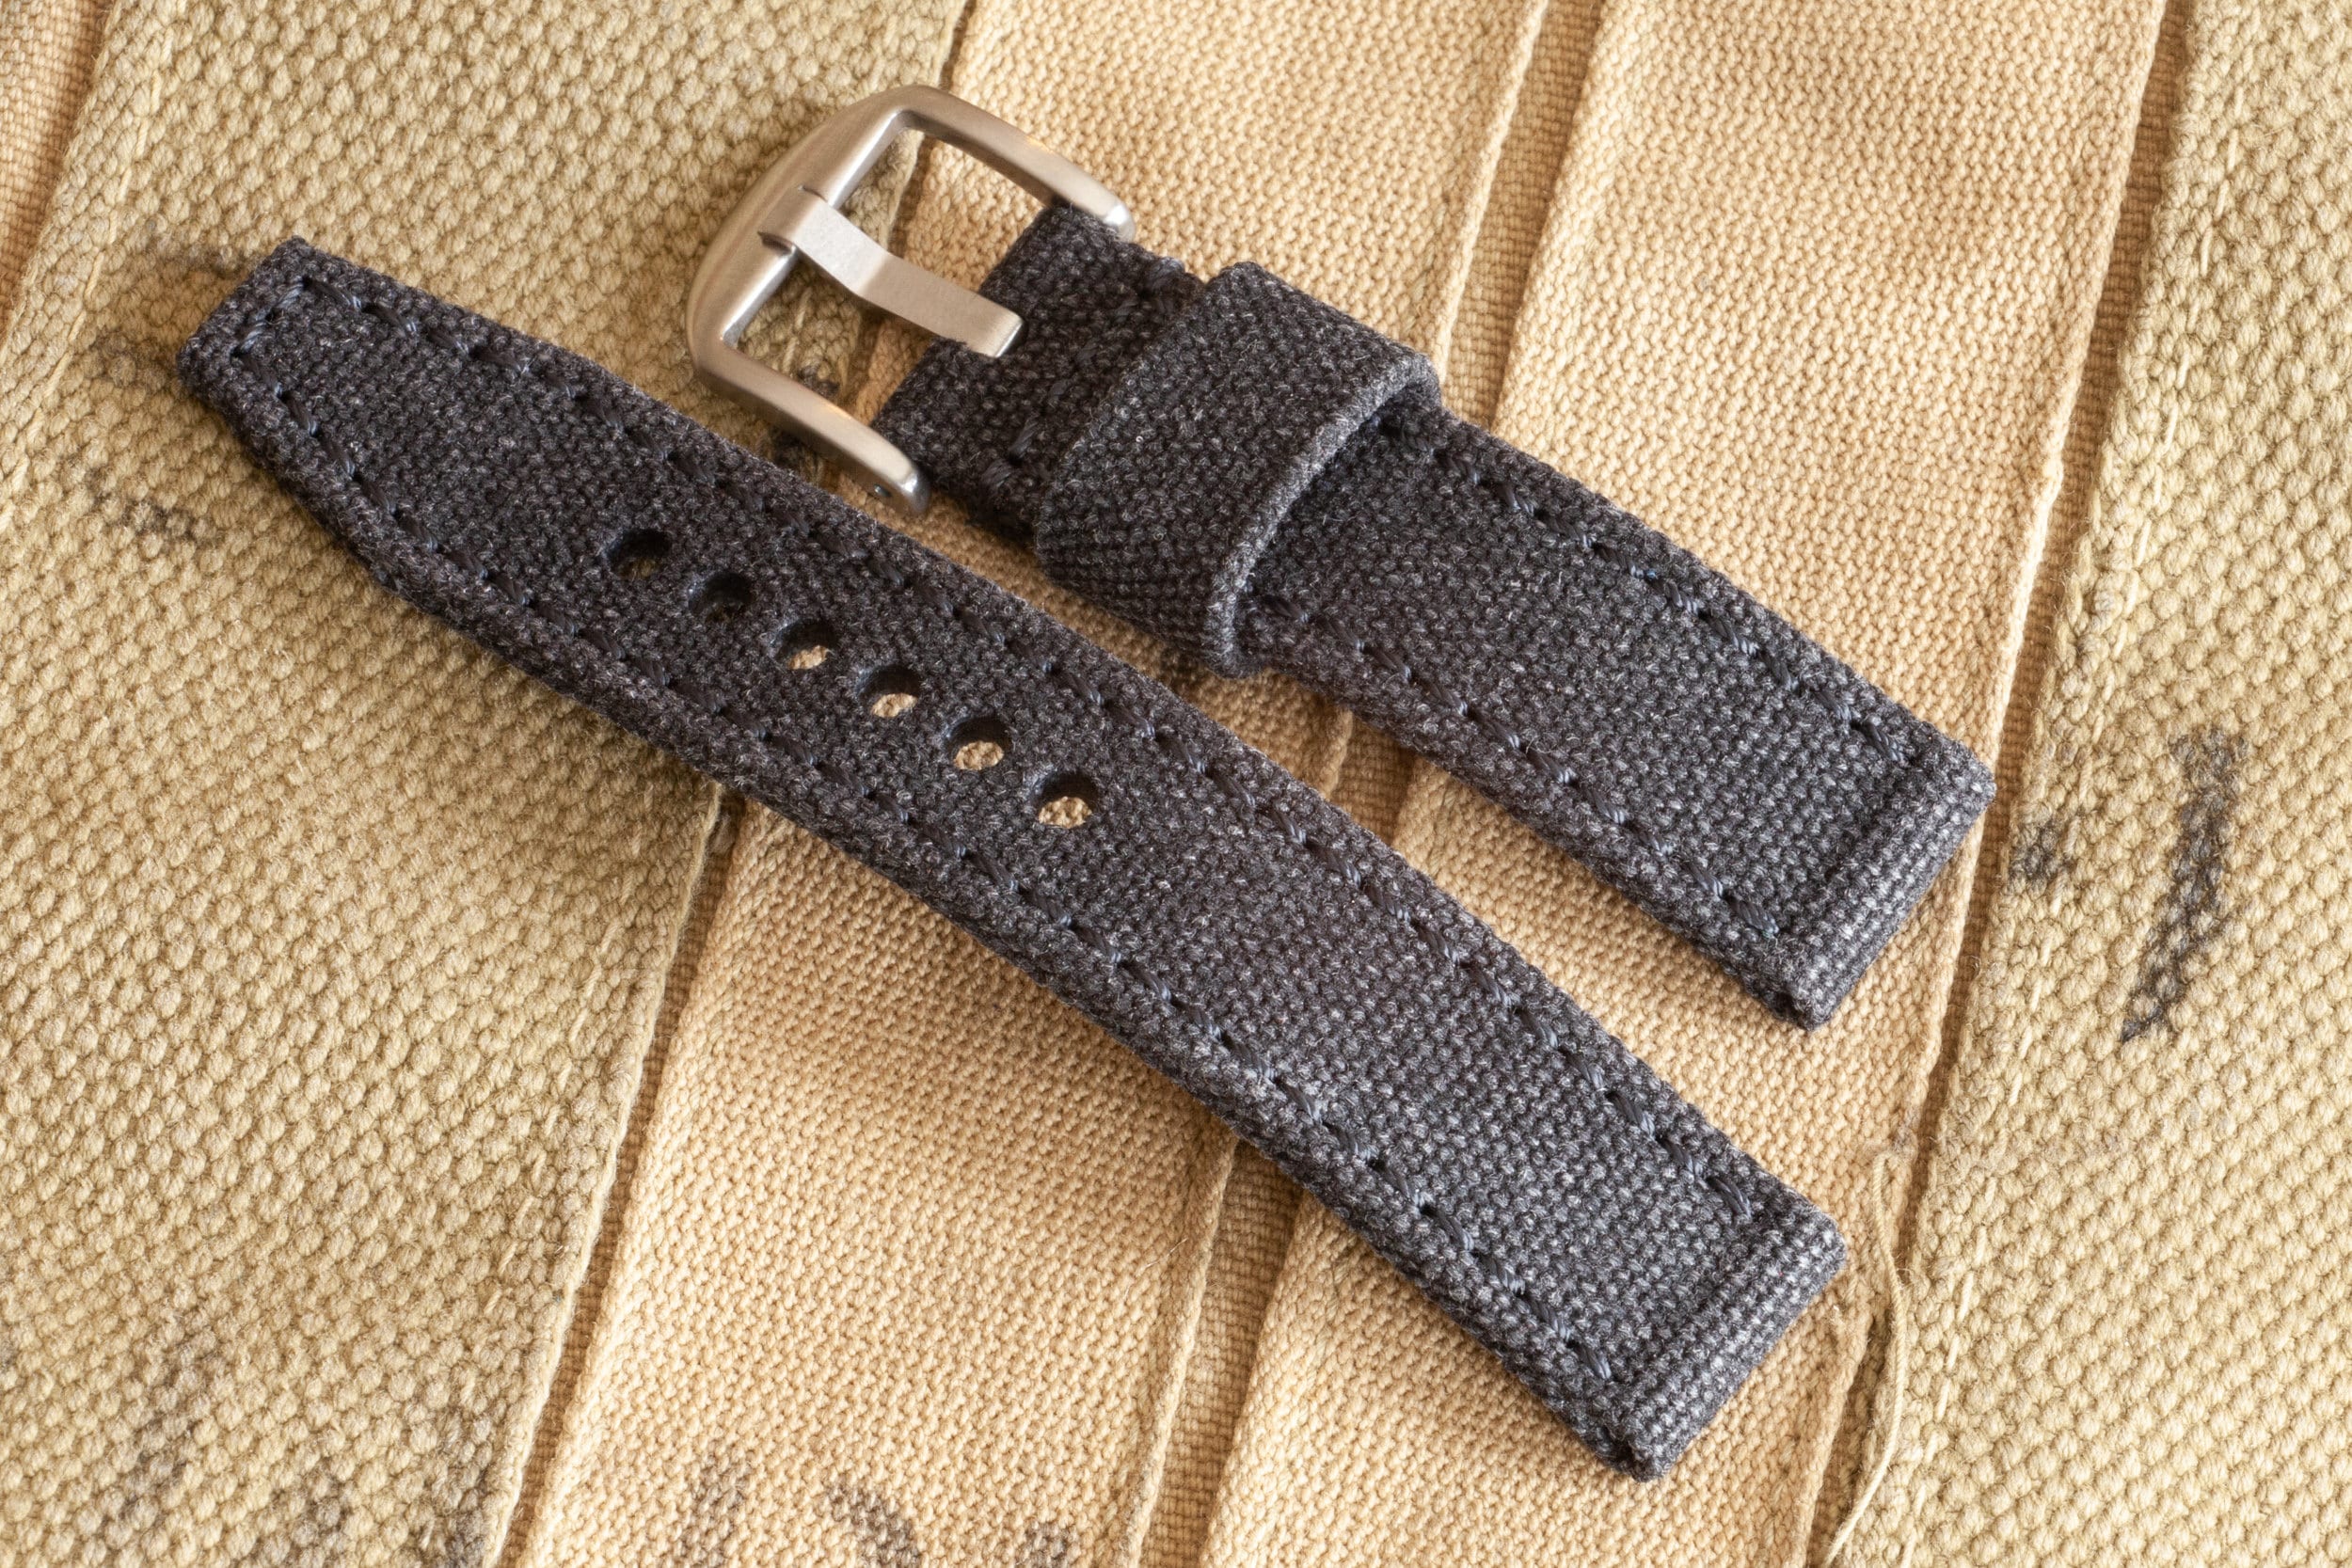 Stone Washed Black Cotton/Poly Blend Canvas Watch Strap in 20mm, 22mm, 24mm, 26mm Sizes